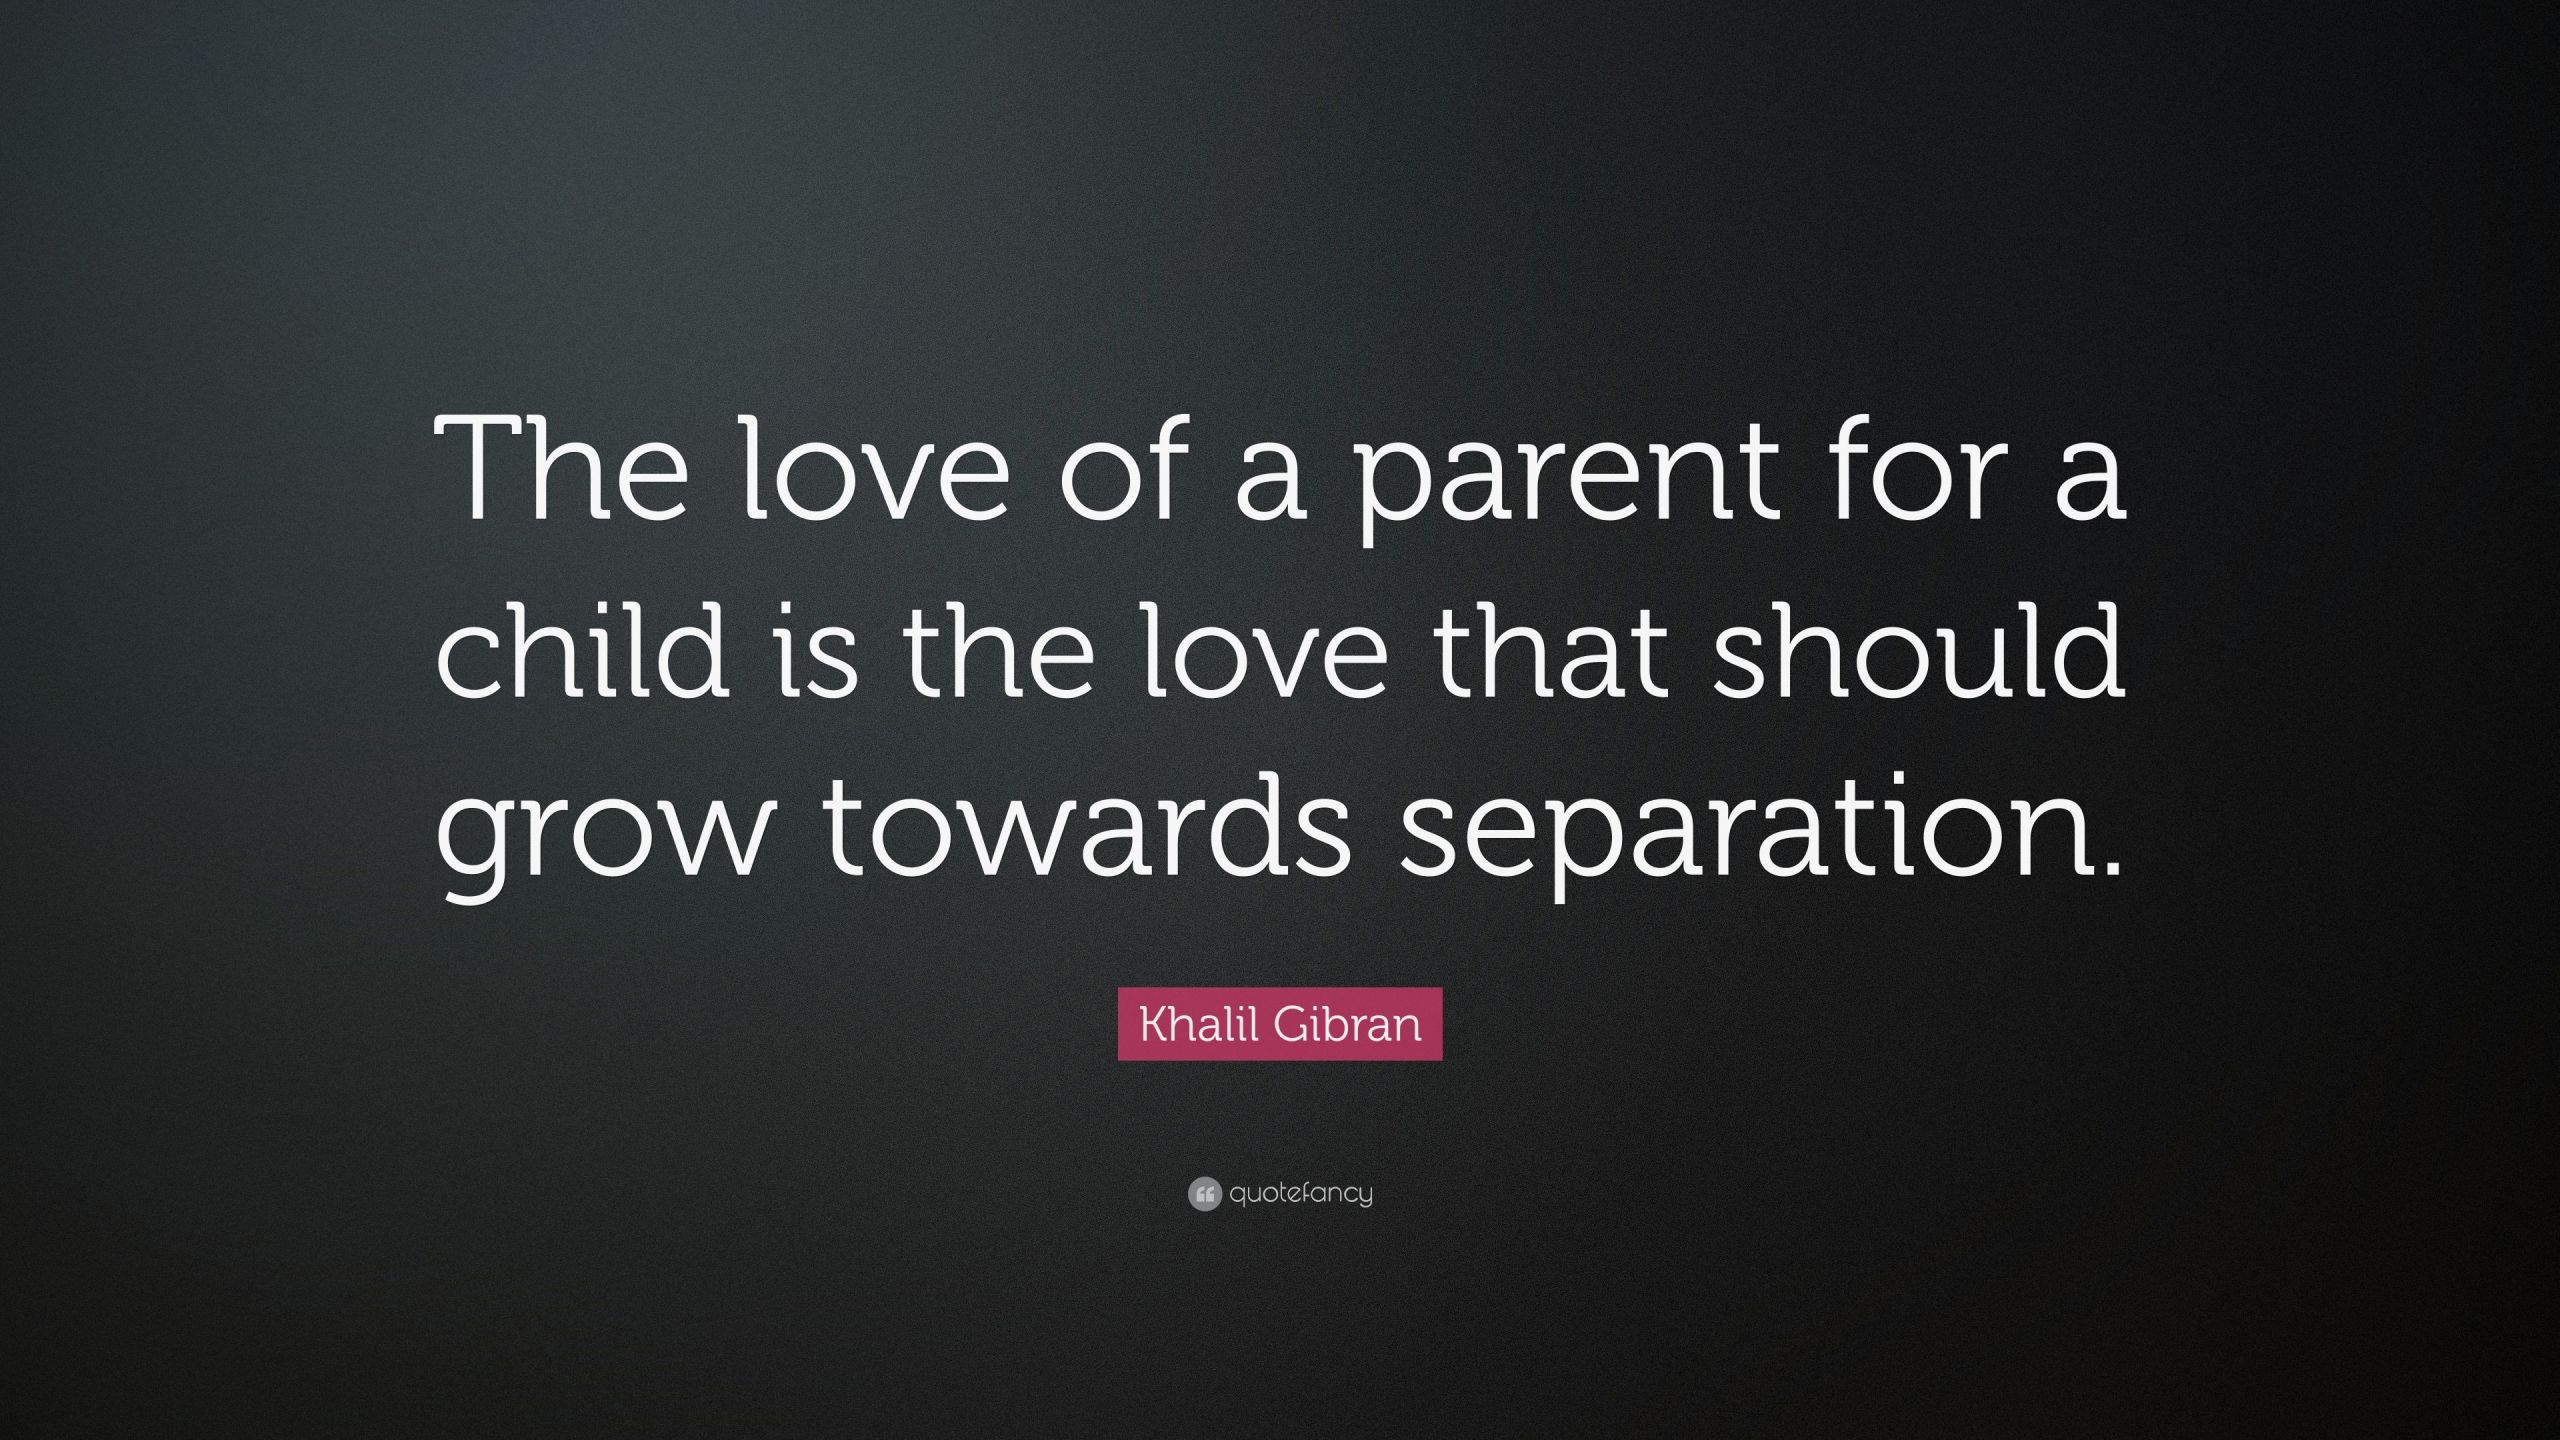 Khalil Gibran Quote On Children
 Khalil Gibran Quote “The love of a parent for a child is